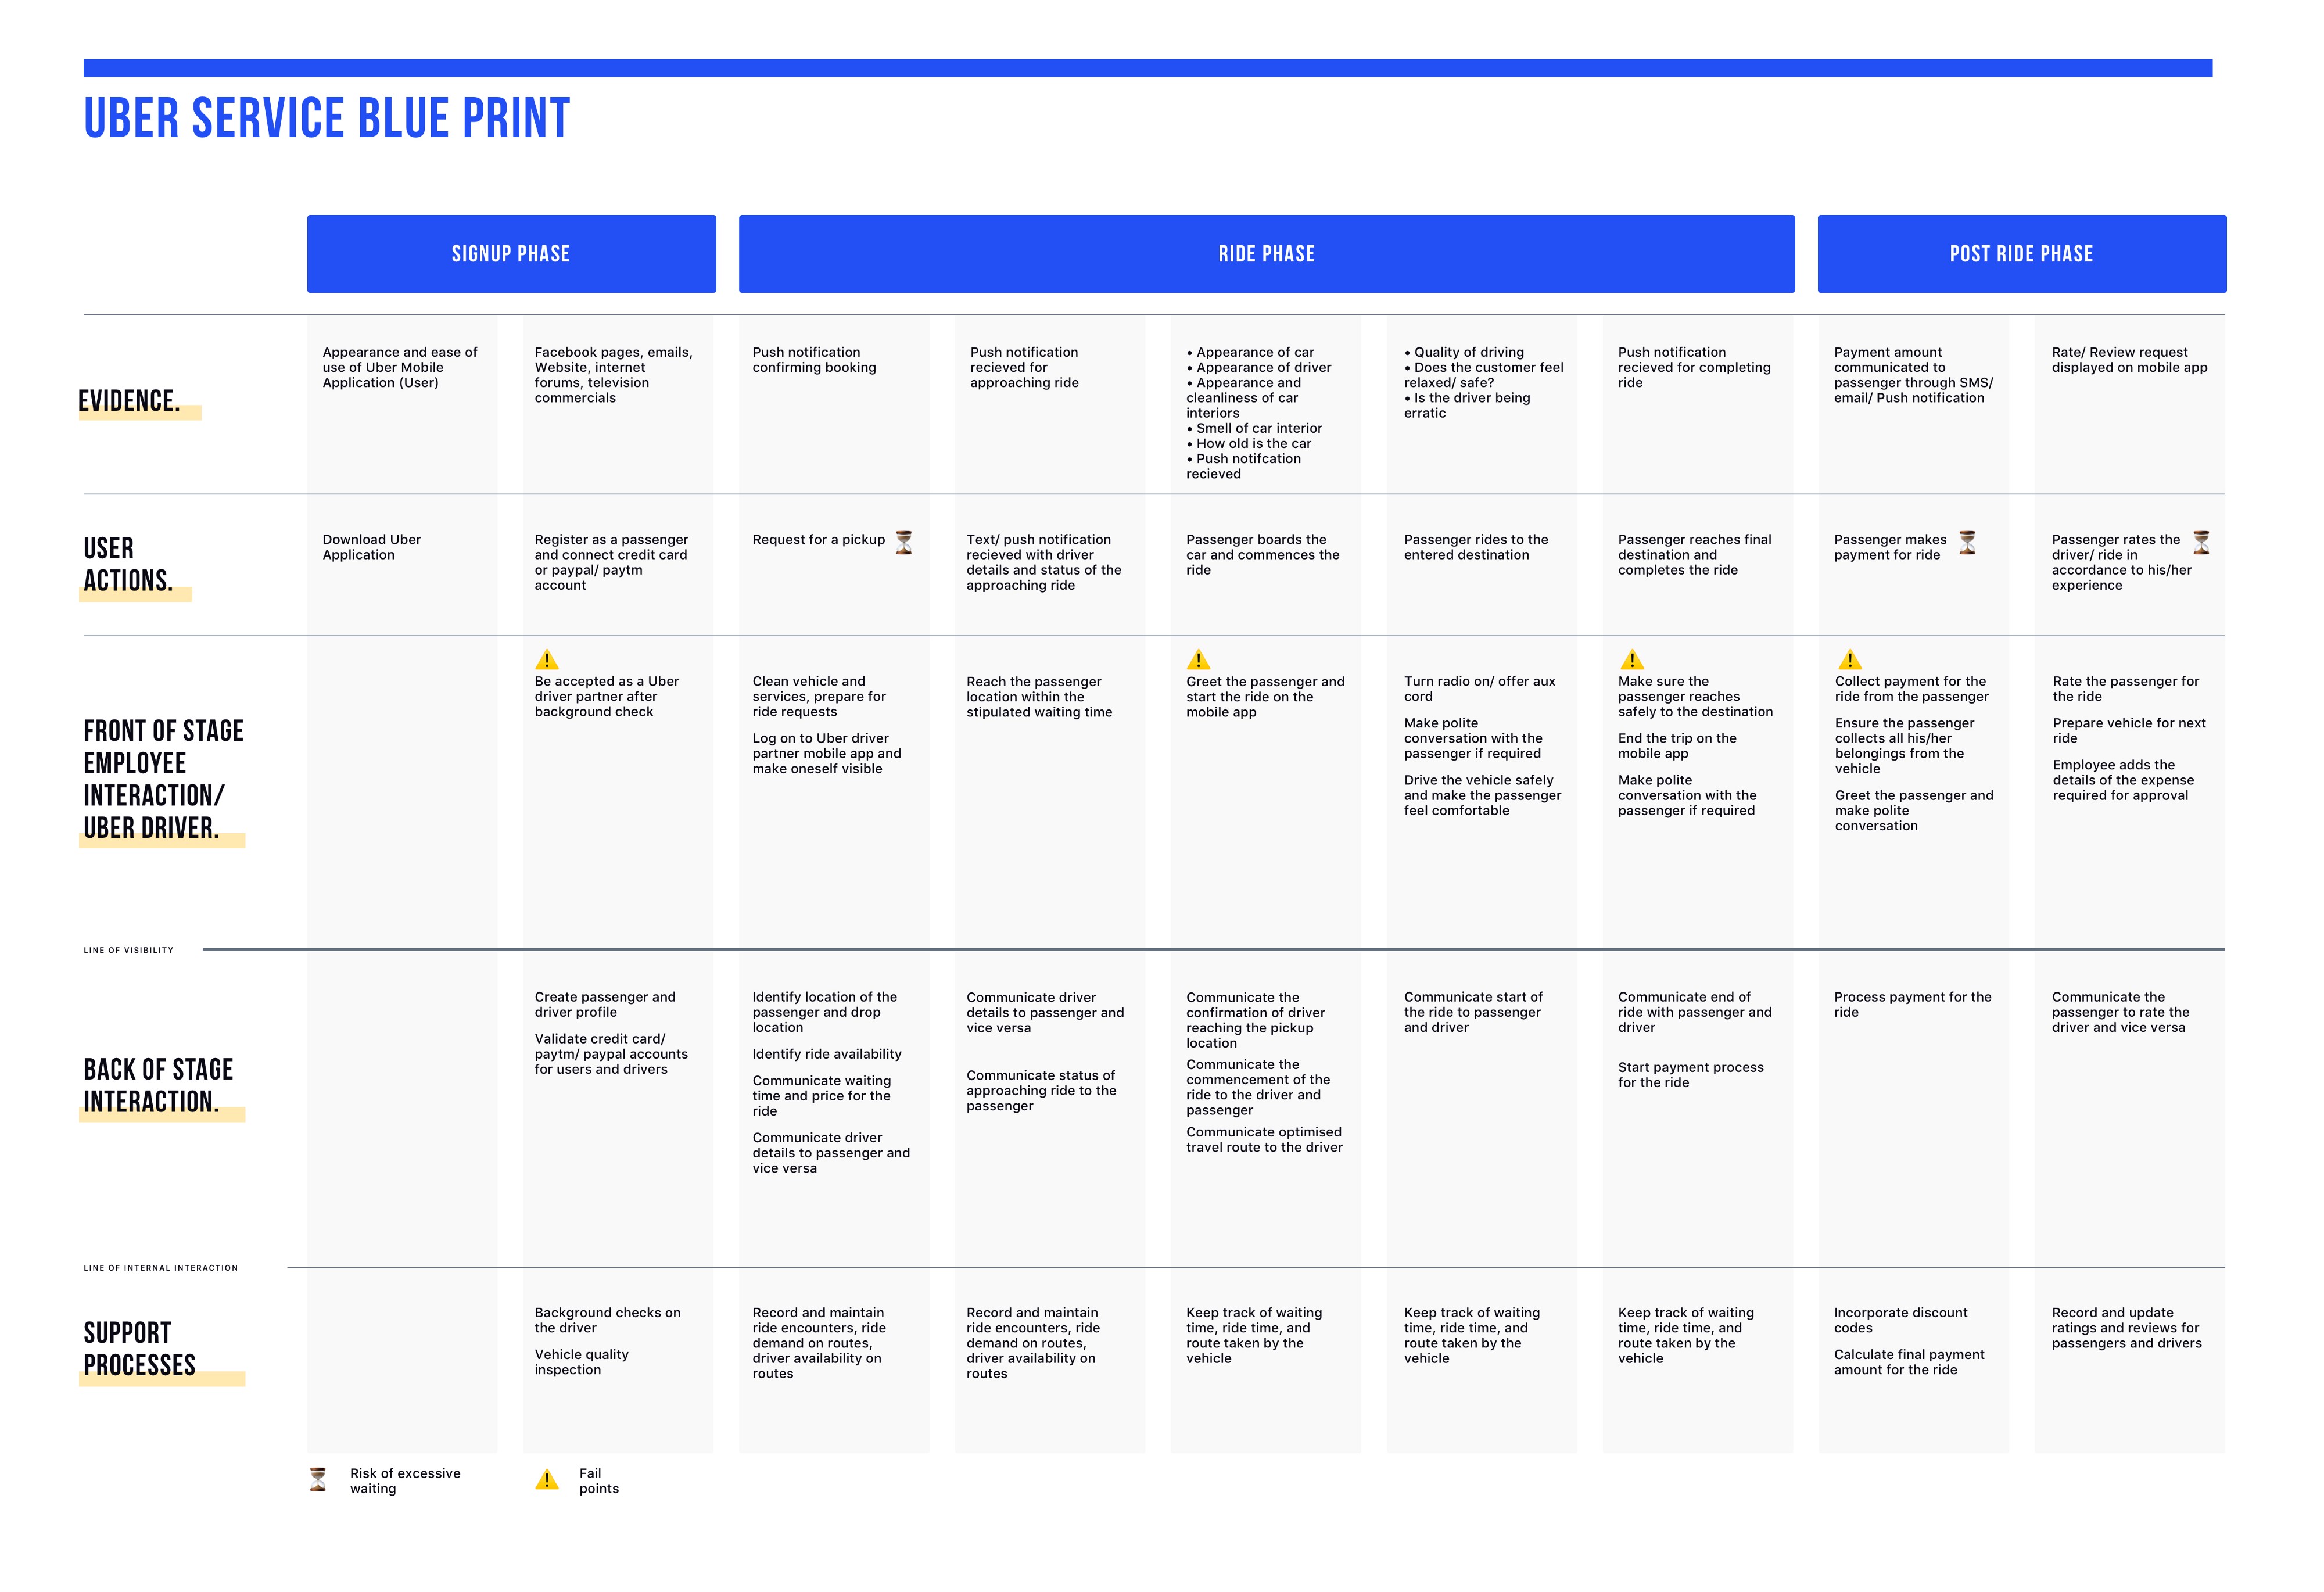 feature image of 'Uber Service Blueprint' case study